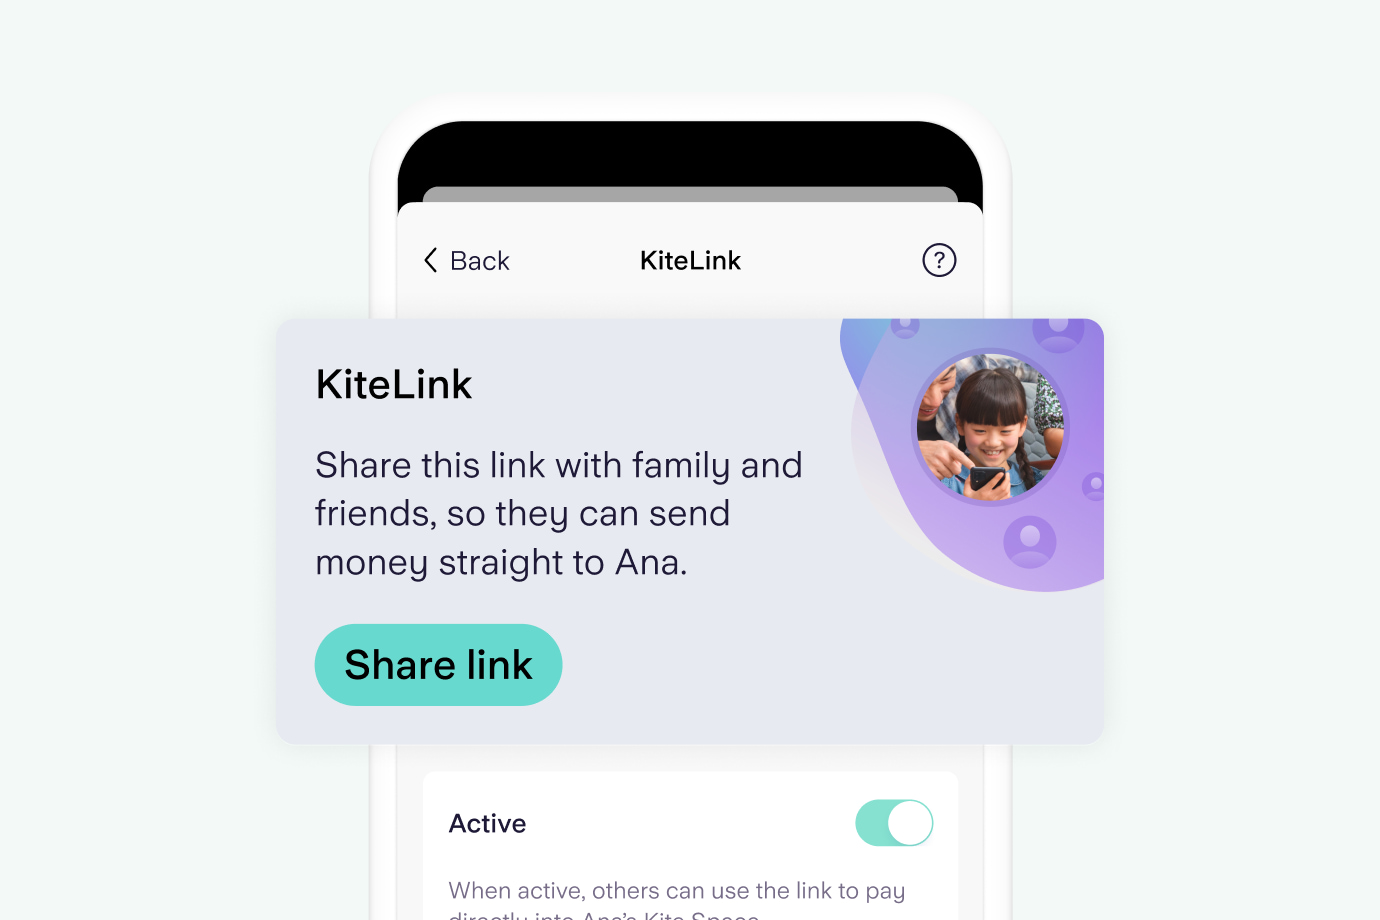 Screenshot of the Starling Bank app's kite link page